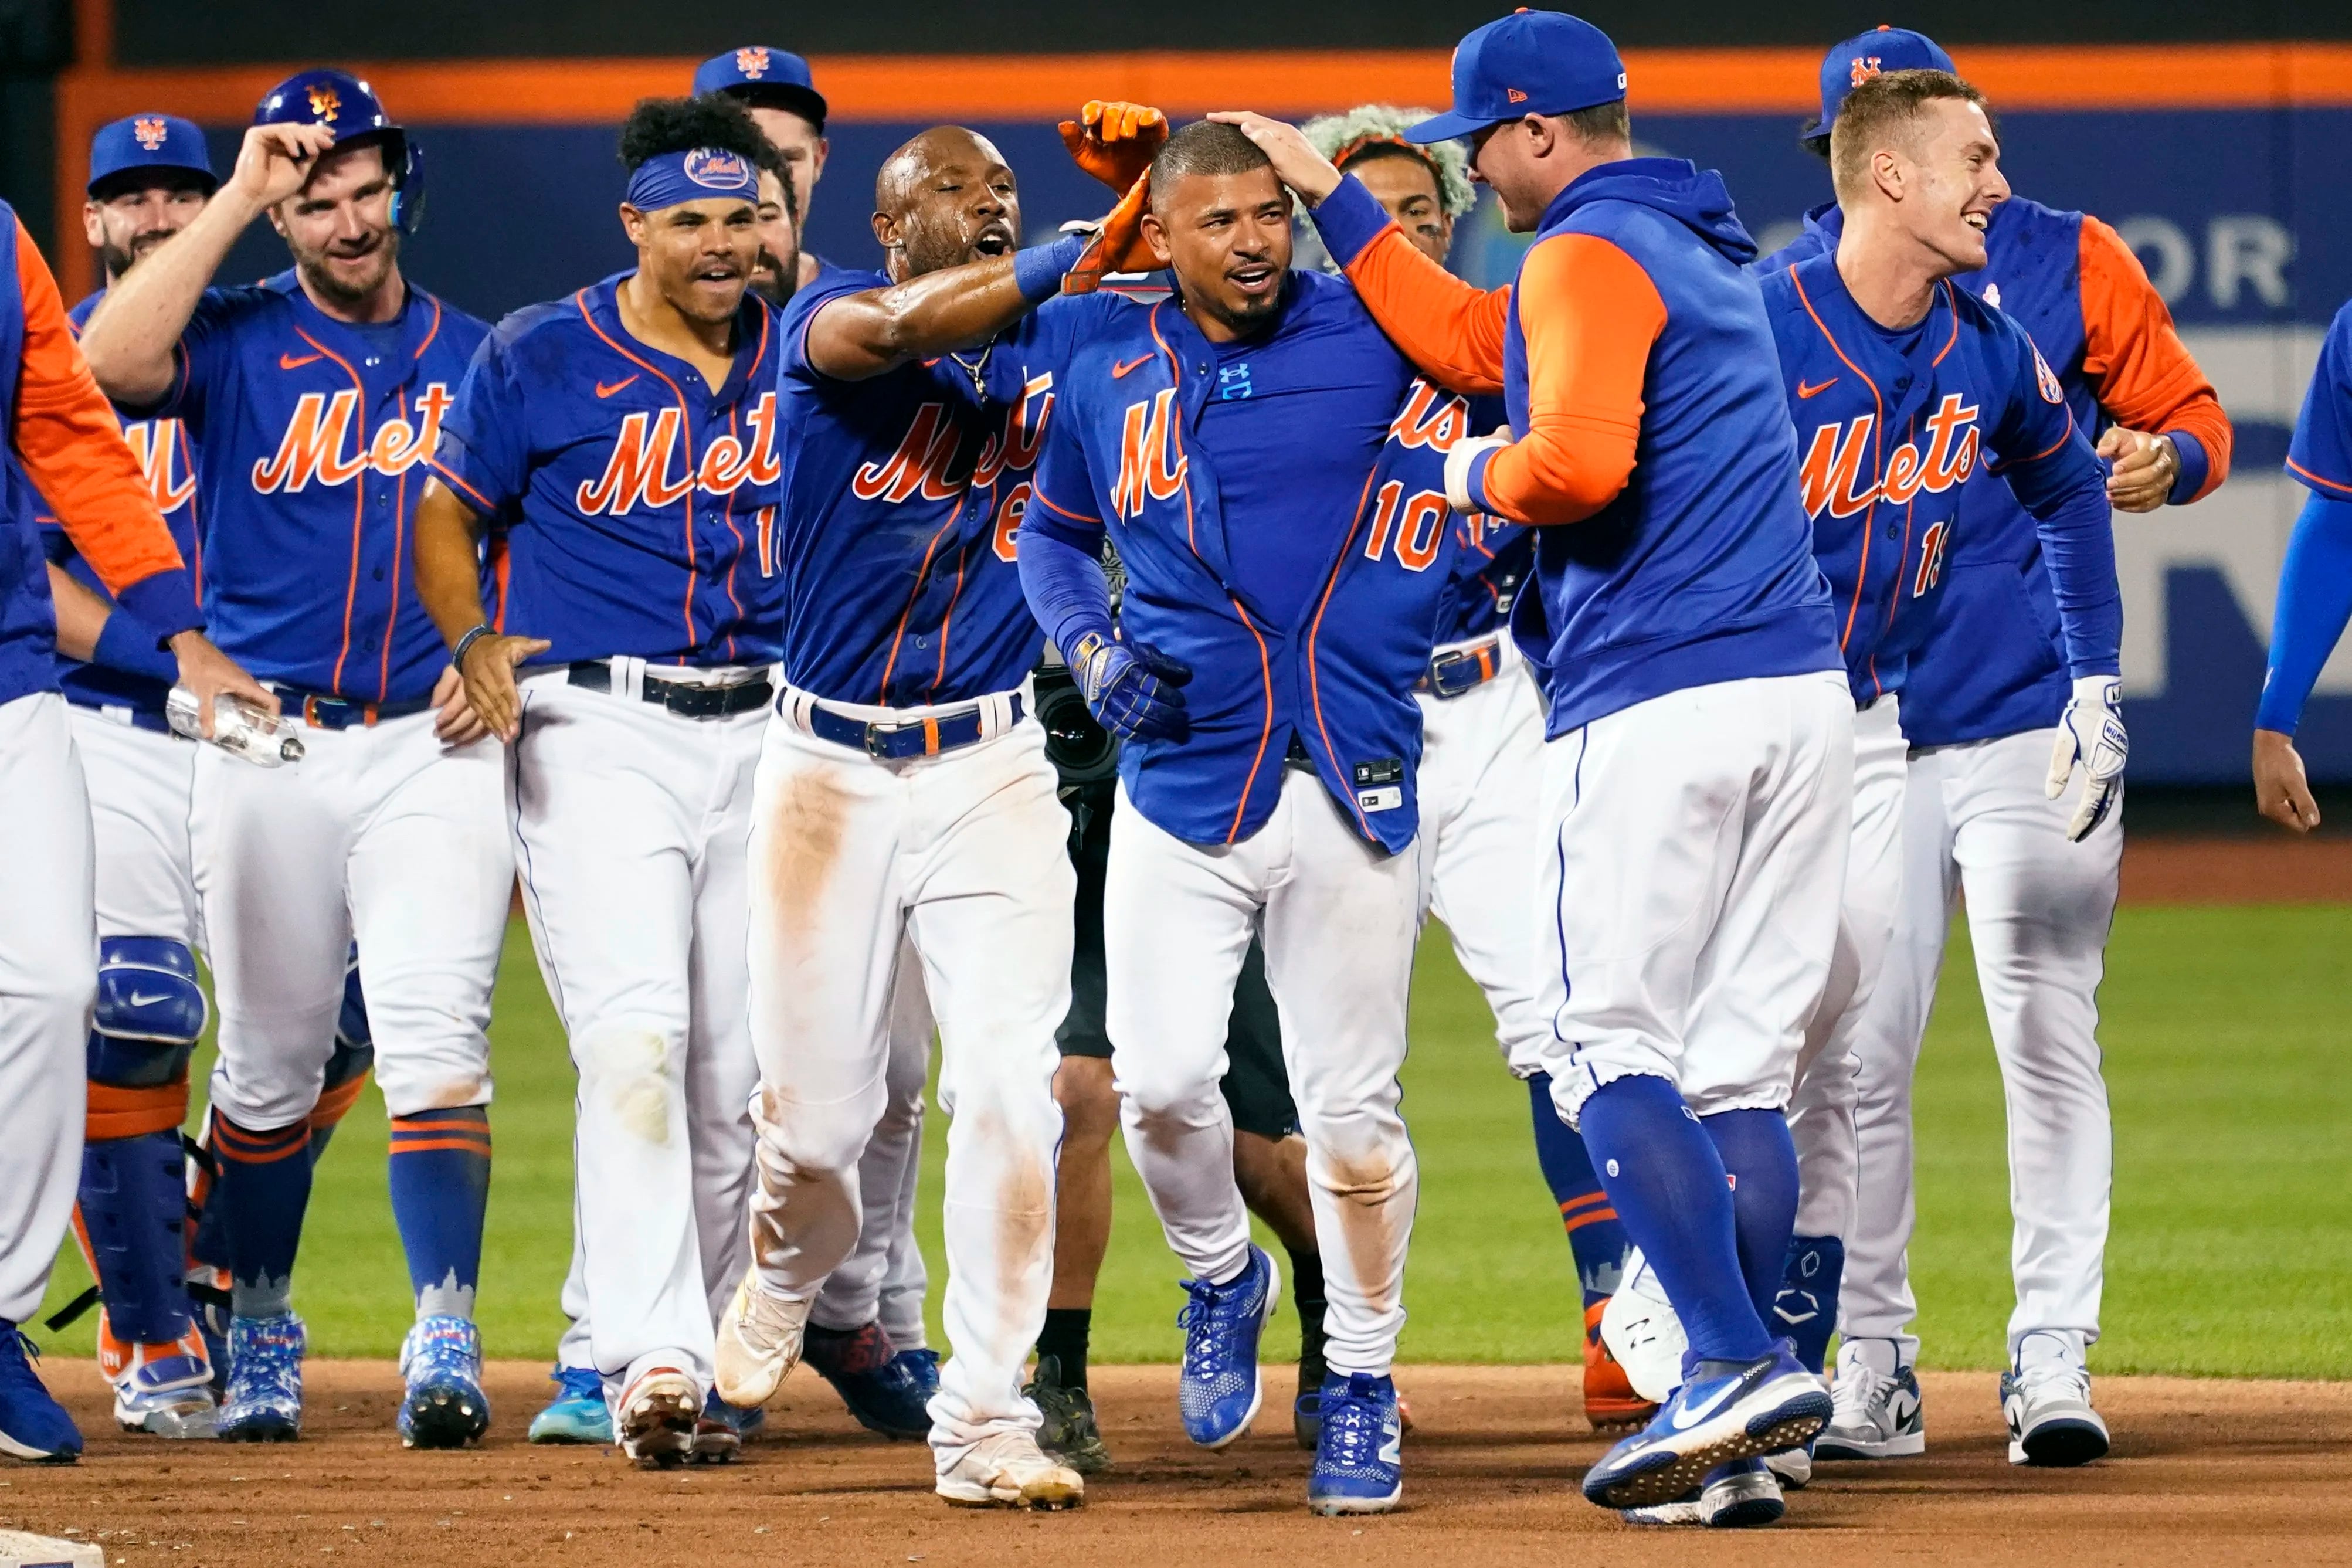 Adam Ottavino gives up walk-off homer as Mets can't complete sweep